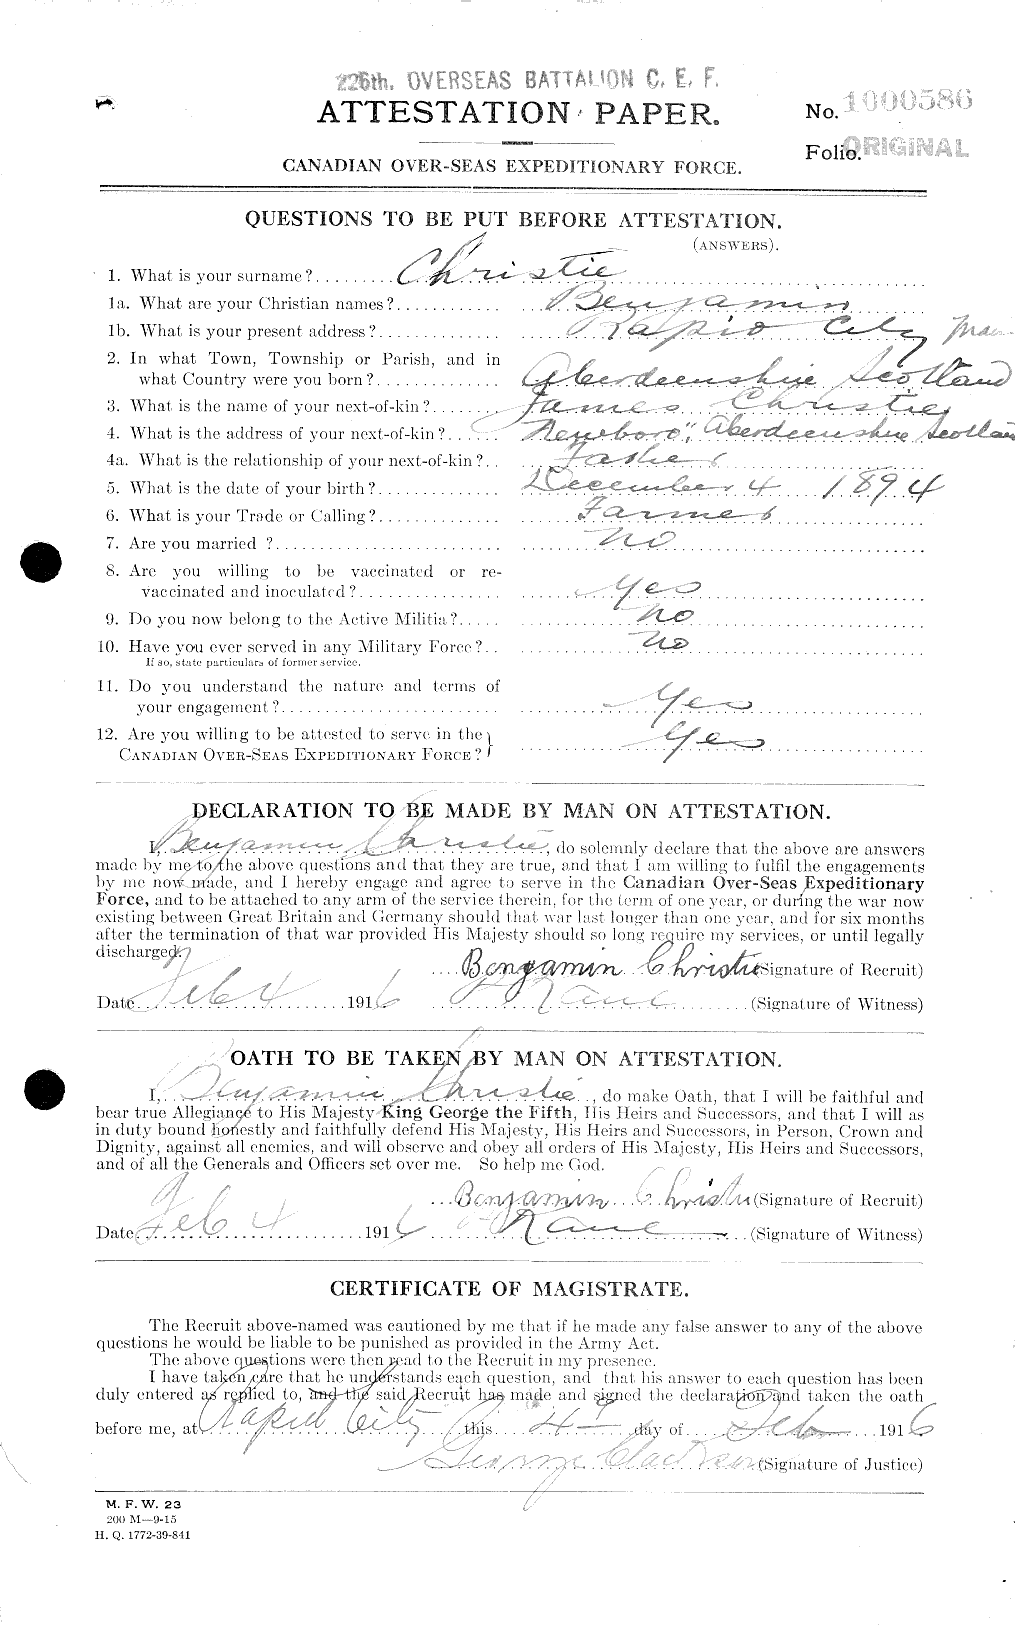 Personnel Records of the First World War - CEF 021883a